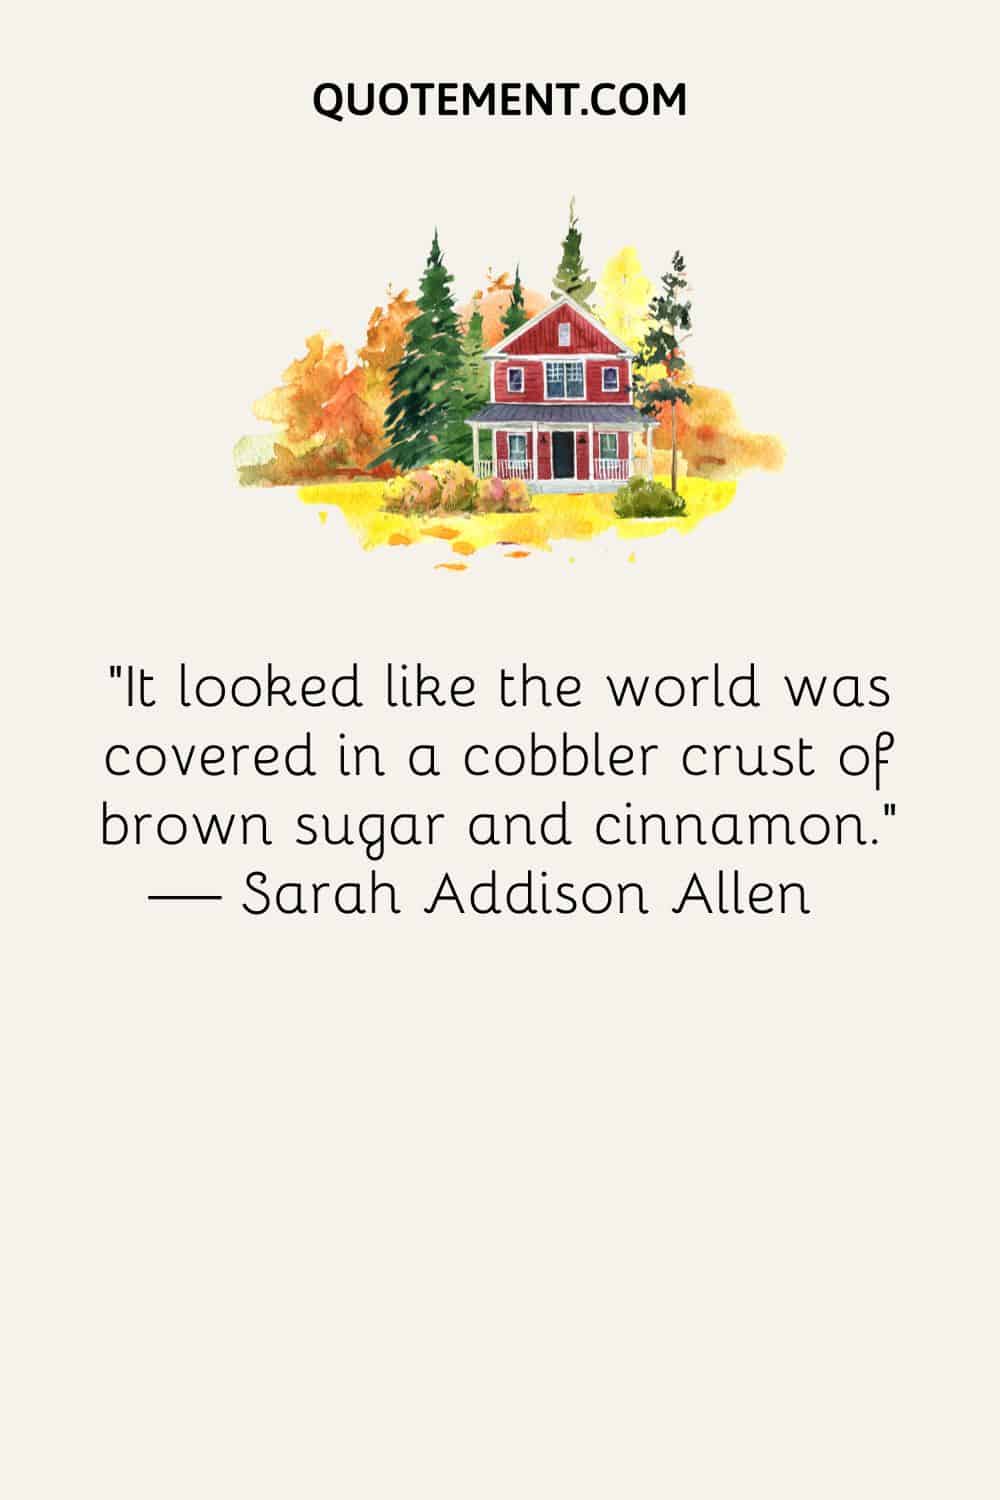 “It looked like the world was covered in a cobbler crust of brown sugar and cinnamon.” — Sarah Addison Allen